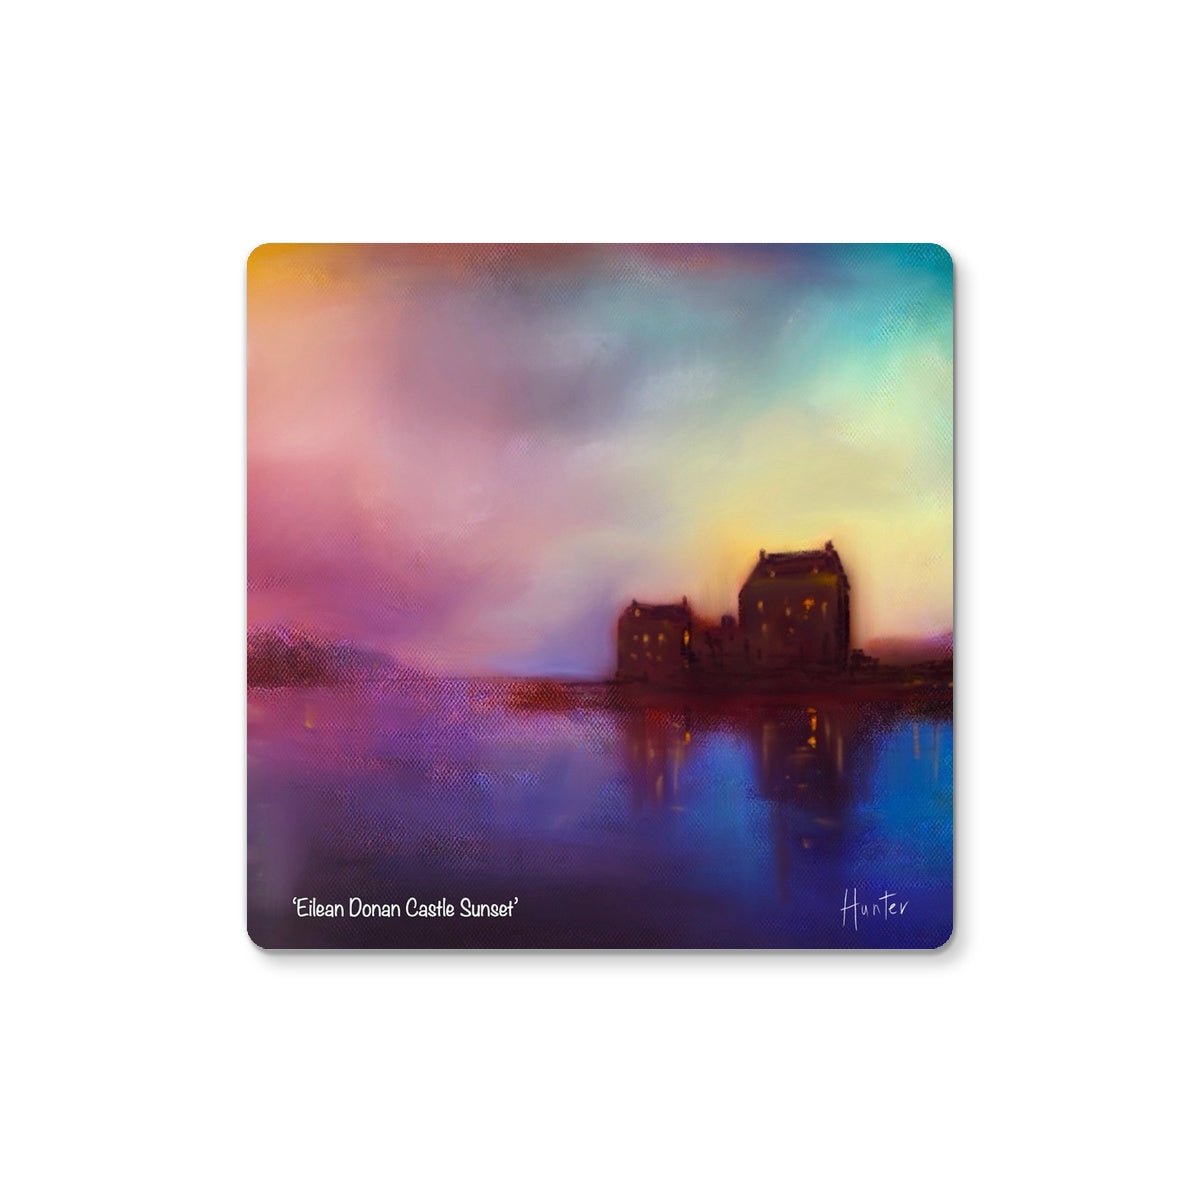 Eilean Donan Castle Sunset Art Gifts Coaster-Coasters-Scottish Castles Art Gallery-6 Coasters-Paintings, Prints, Homeware, Art Gifts From Scotland By Scottish Artist Kevin Hunter